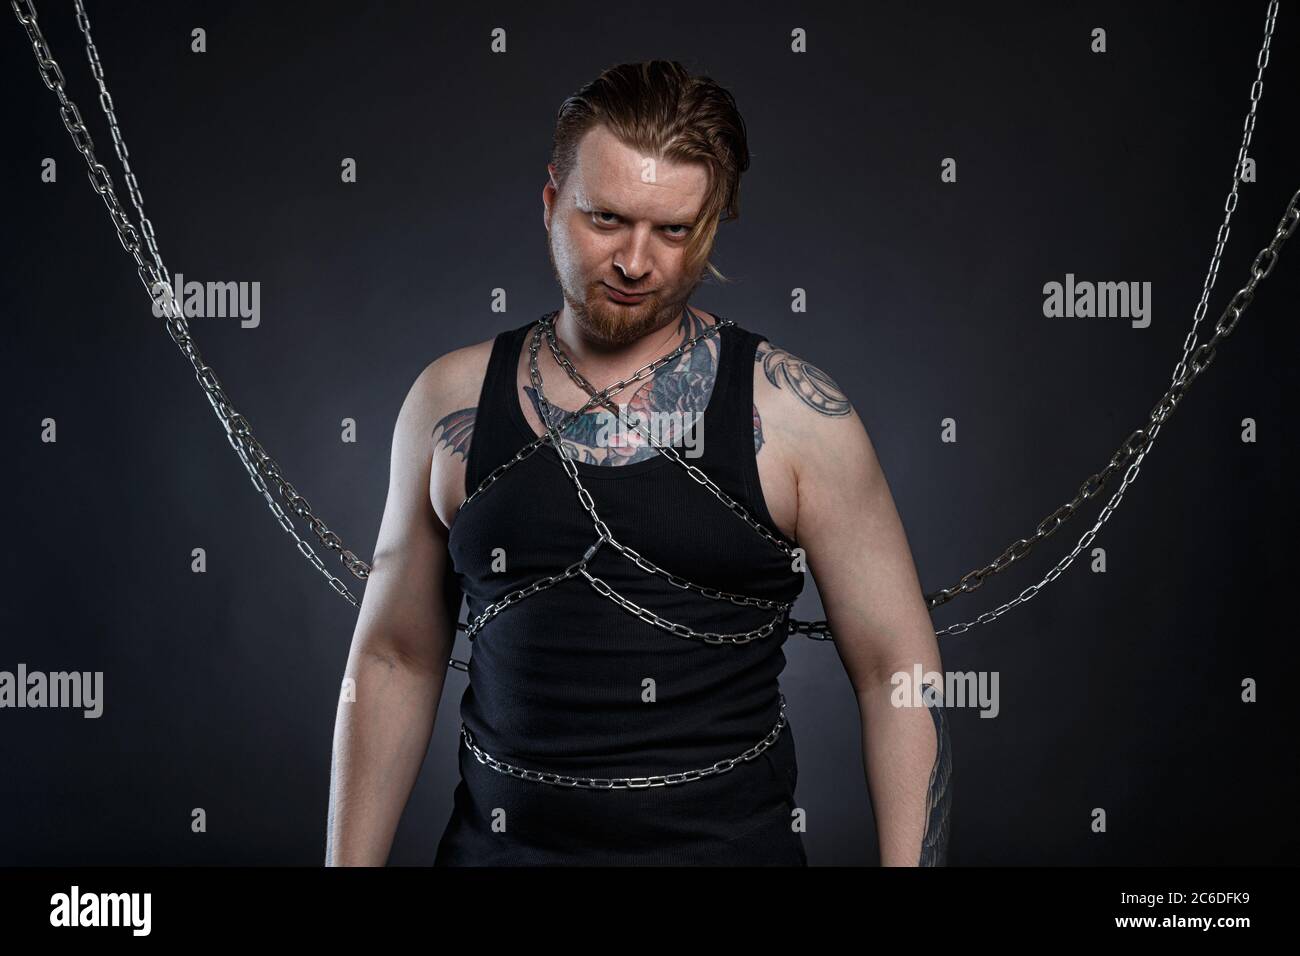 Photo Of A Tattooed Bearded Man Bound In Chains Stock Photo Alamy